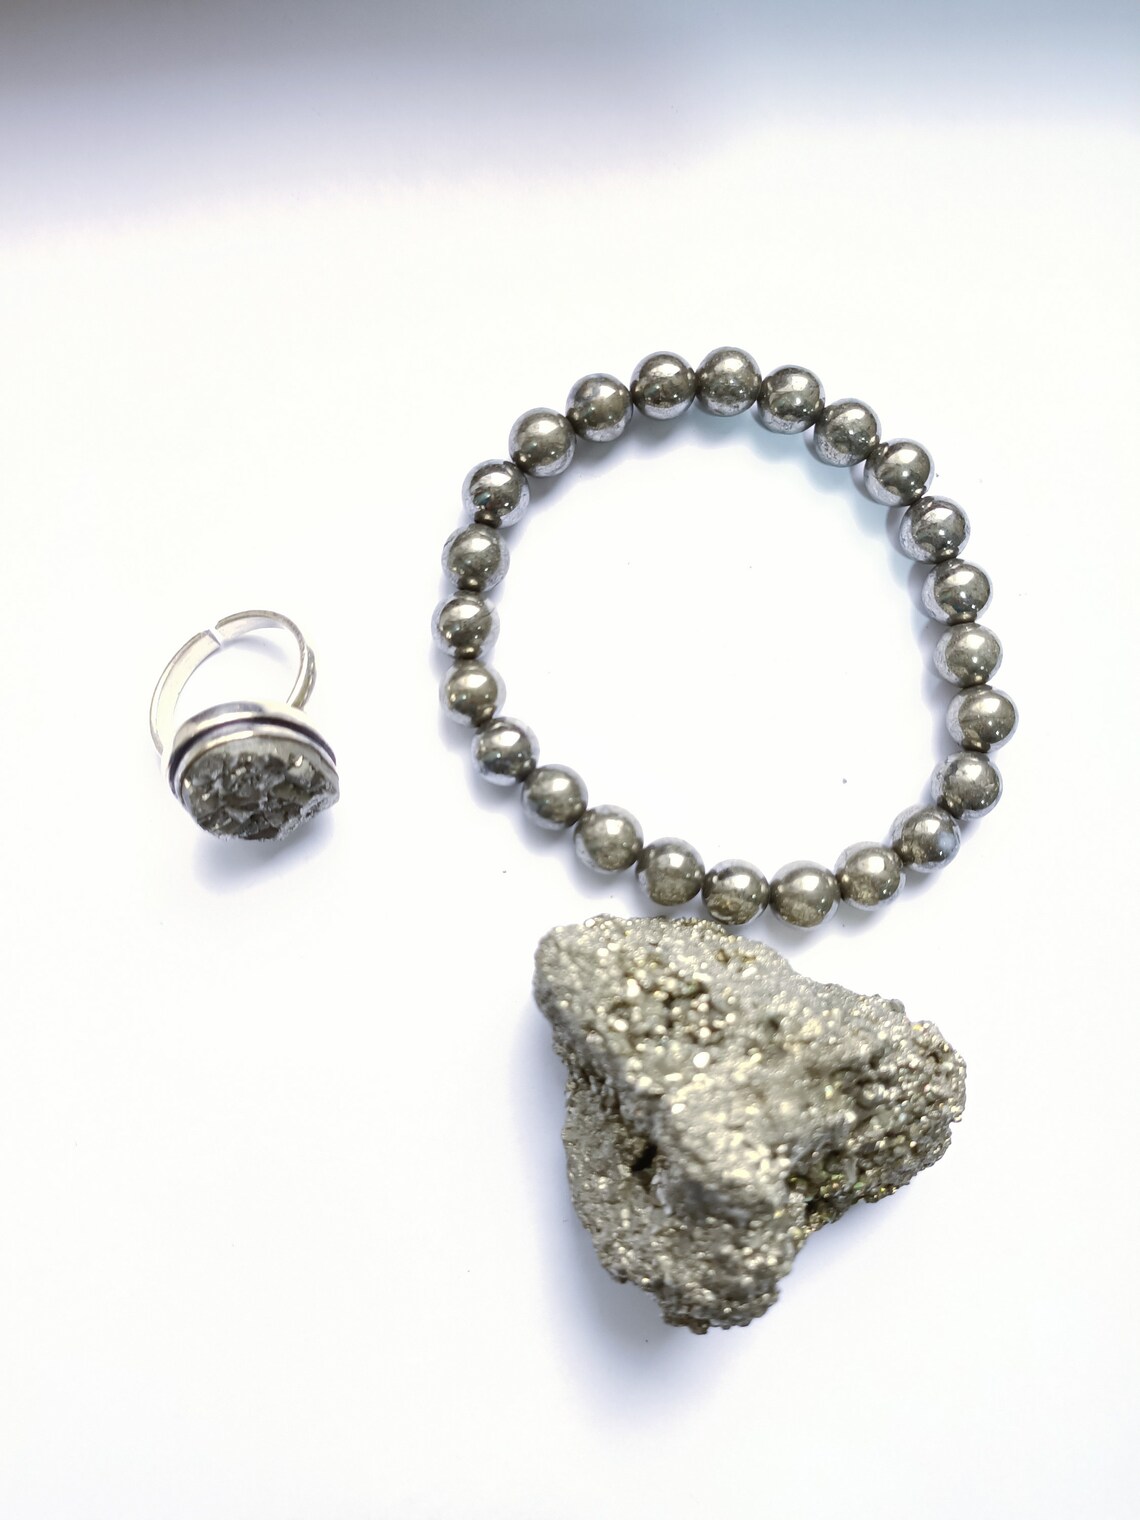 Pyrite Stone for wealth and abundance, Money attracting 1 Pyrite bracelet , Pyrite Ring and 100 GM raw pyrite stone